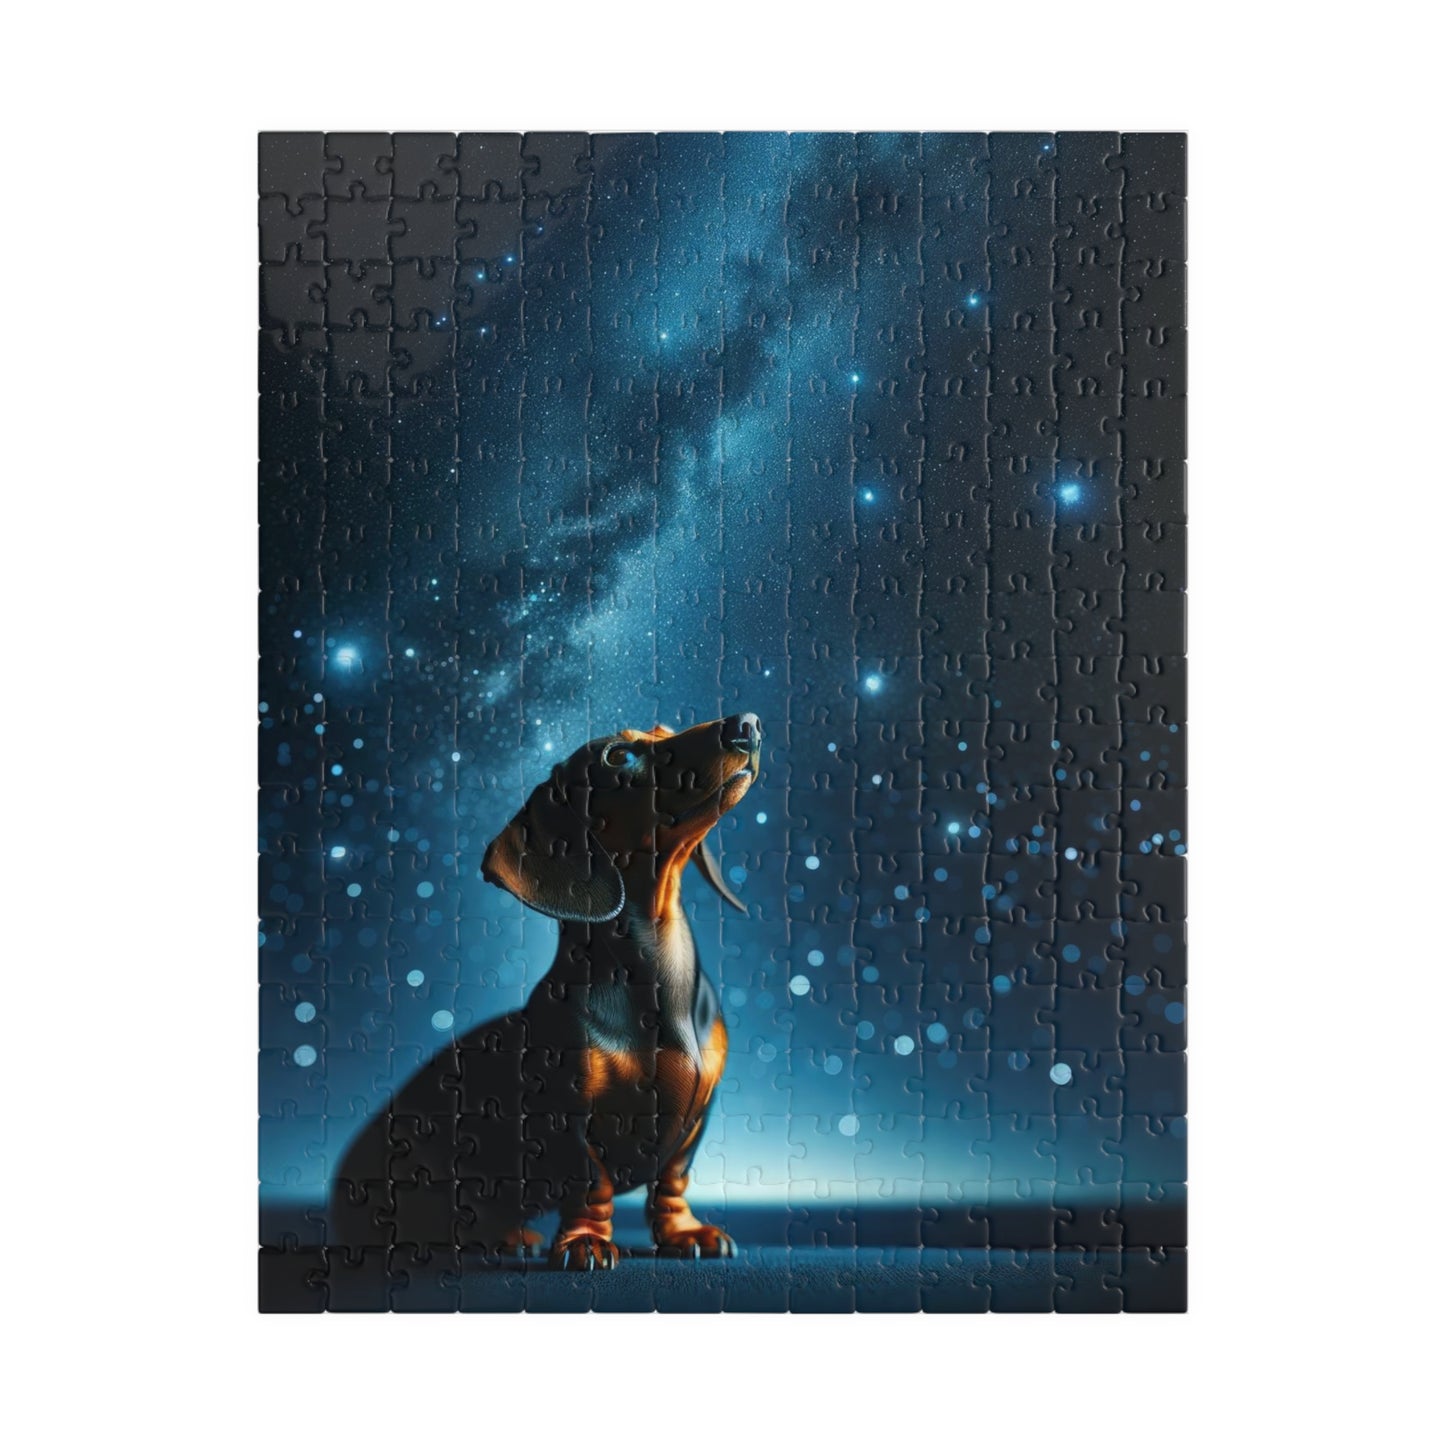 Stargazer Dachshund Jigsaw Puzzle - Cosmic Canine Collection - Glossy Finish, Multiple Pieces Options 110, 252, 520, 1014